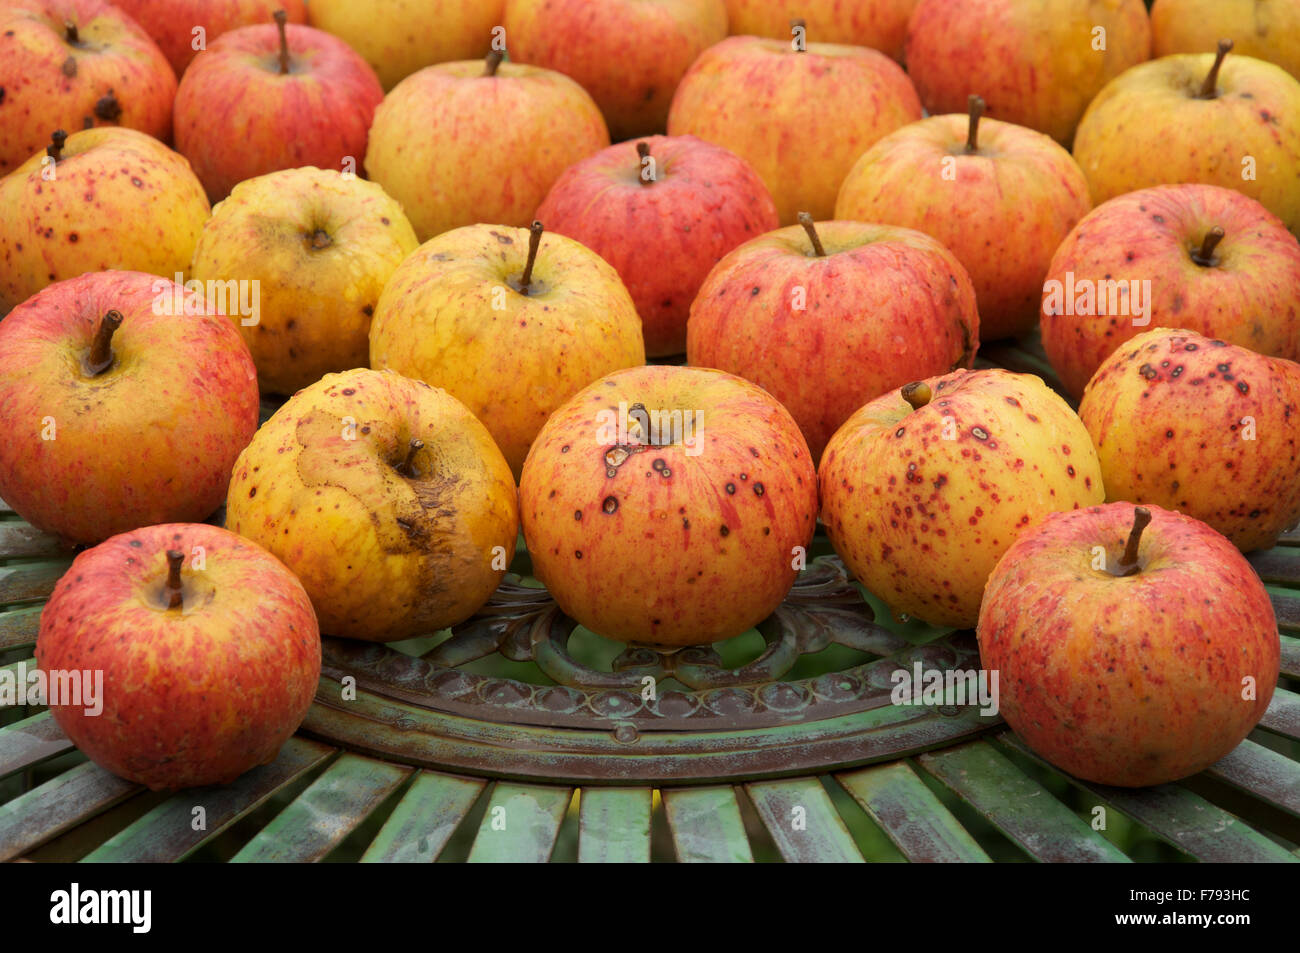 Ripe eating apples, the sweet delicious fruit of the Apple tree “Malus domestica”, laid out on a metal garden table. England, United Kingdom. Stock Photo